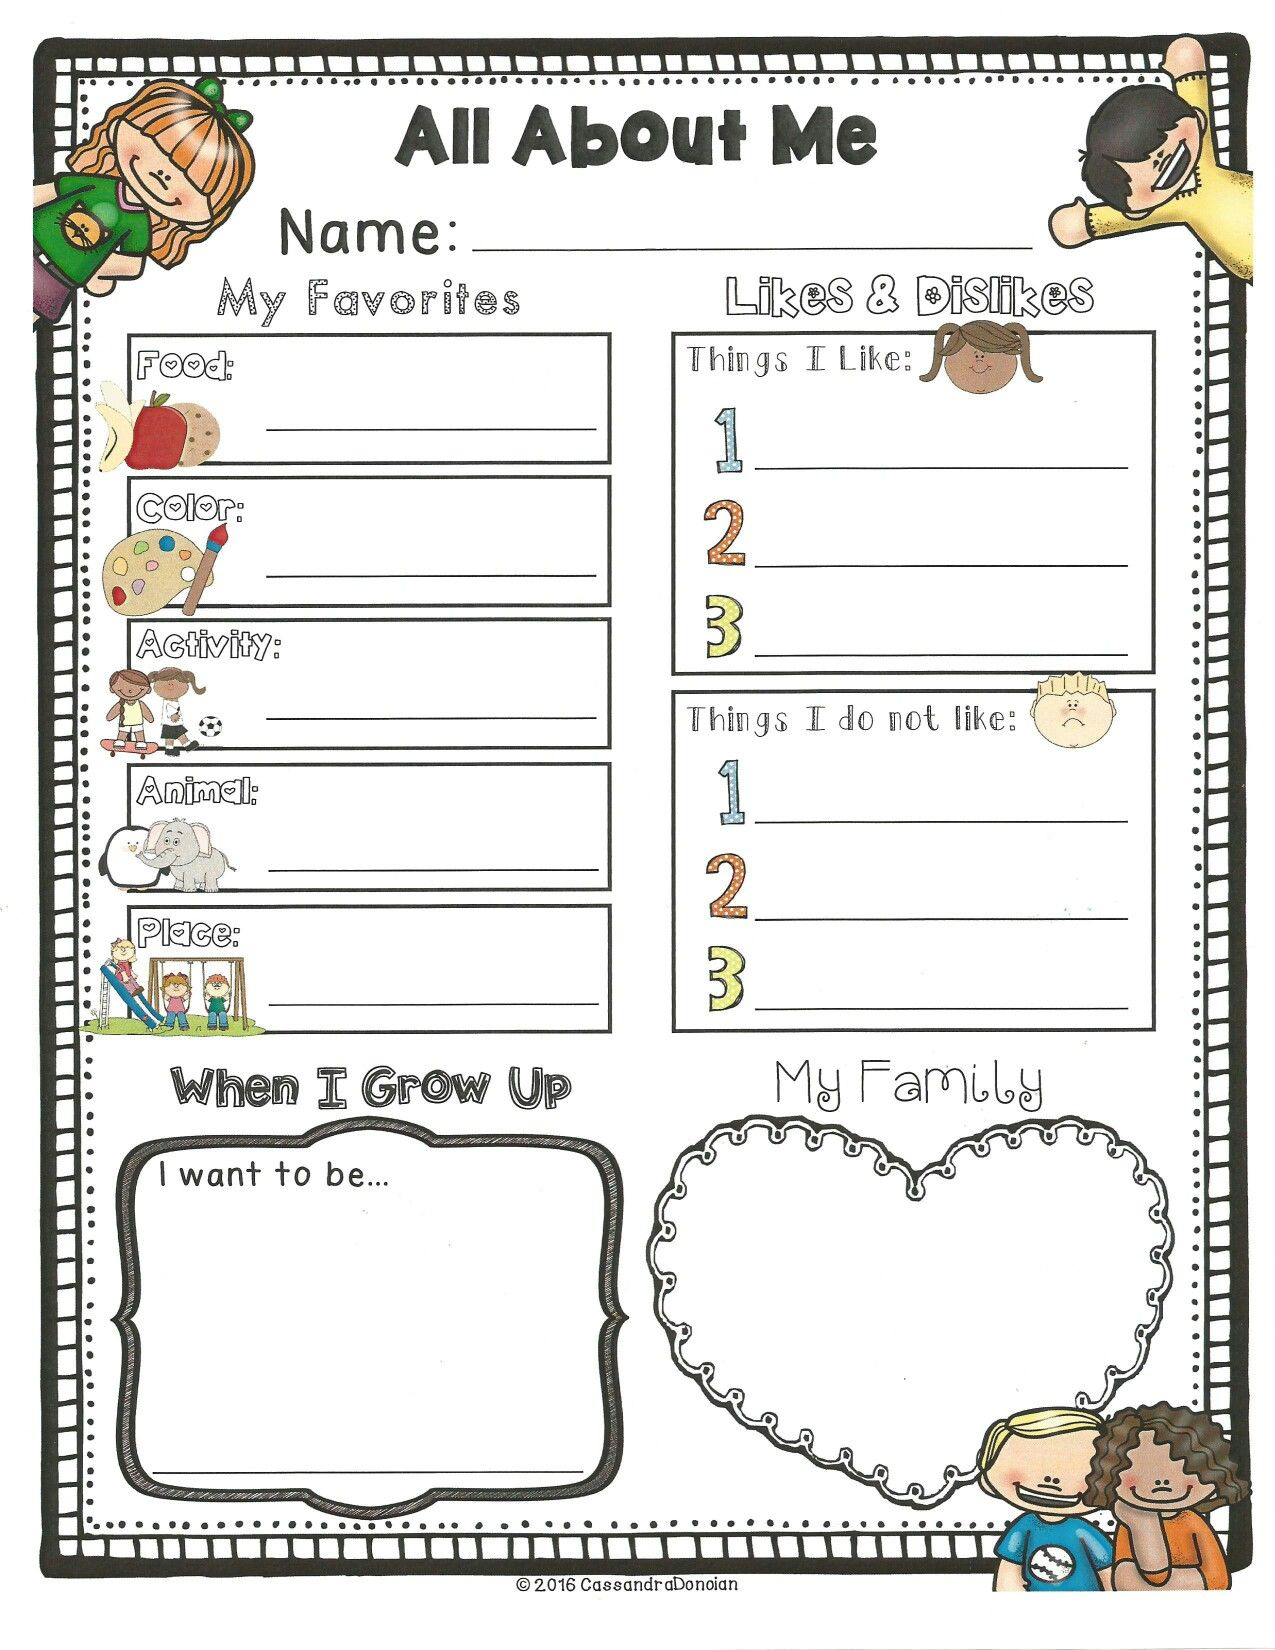 All About Me Sheet For Preschool Or Kindergarten Age Child All About 